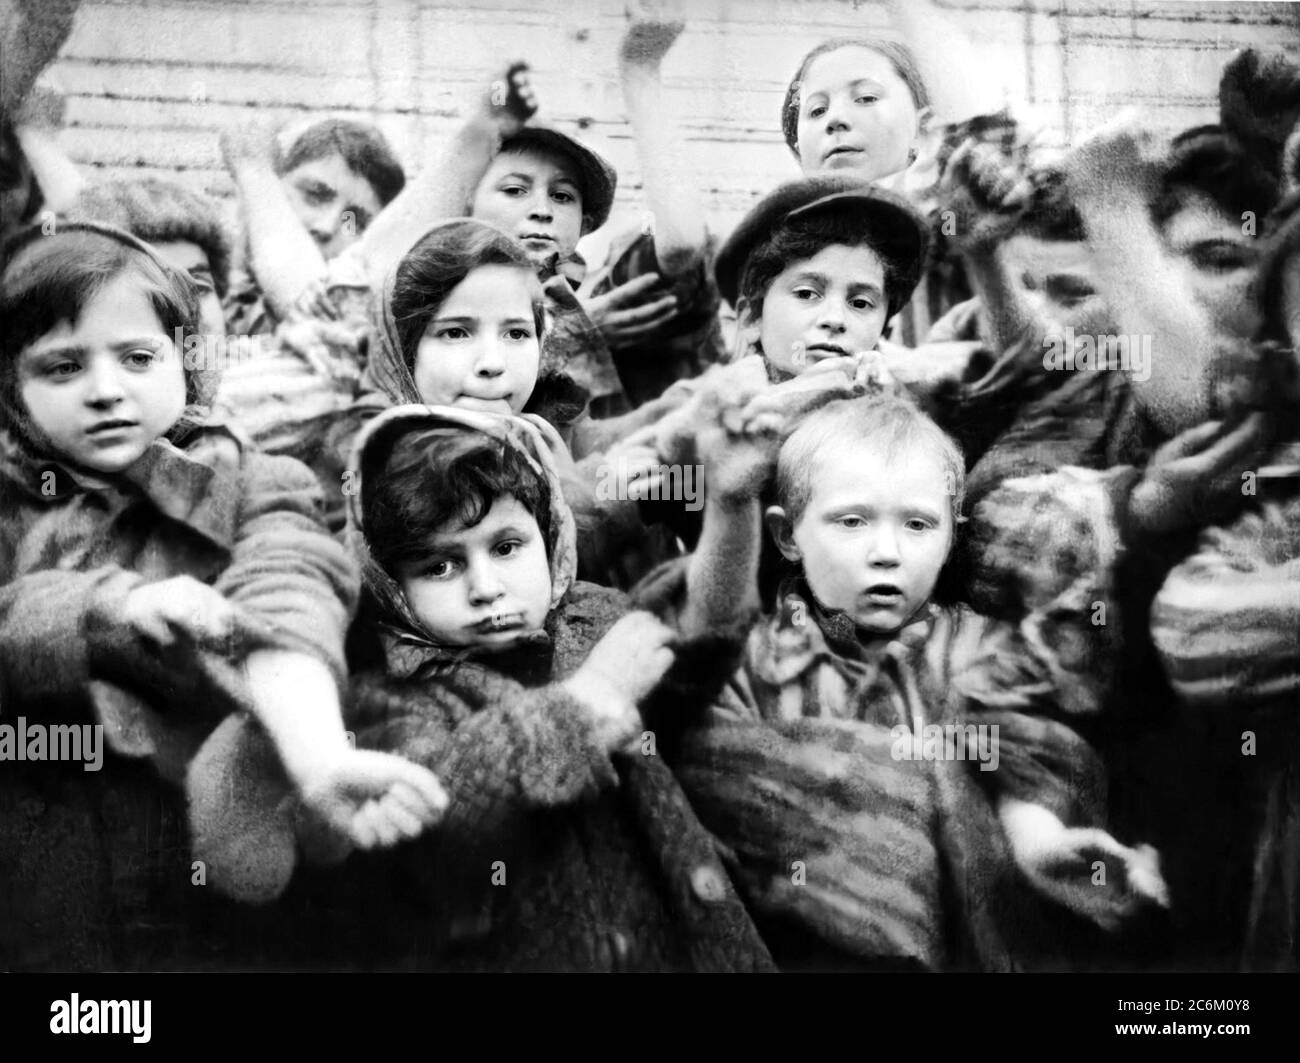 1945 , january, AUSCHWITZ , POLAND : The Nazi German Concentration Camp, children survived at Olocaust the day of liberation by russian Soviet Red Army , show the serial numbers tattooed on the right arm . Photo taken by an unknown military photographer at service of  Russian troops. -  Konzentrationslager Auschwitz - Second World War - Shoà - OLOCAUSTO - EBREI - Campi di concentramento di sterminio ebraico - WWII - WORLD WAR 2nd - SECONDA GUERRA MONDIALE - WW2nd - WW2 - foto storiche - foto storica  - GERMANIA - POLONIA - HISTORY - FOTO STORICHE - NAZIST - NAZISTA - NAZISTI - NAZISMO - NAZISM Stock Photo